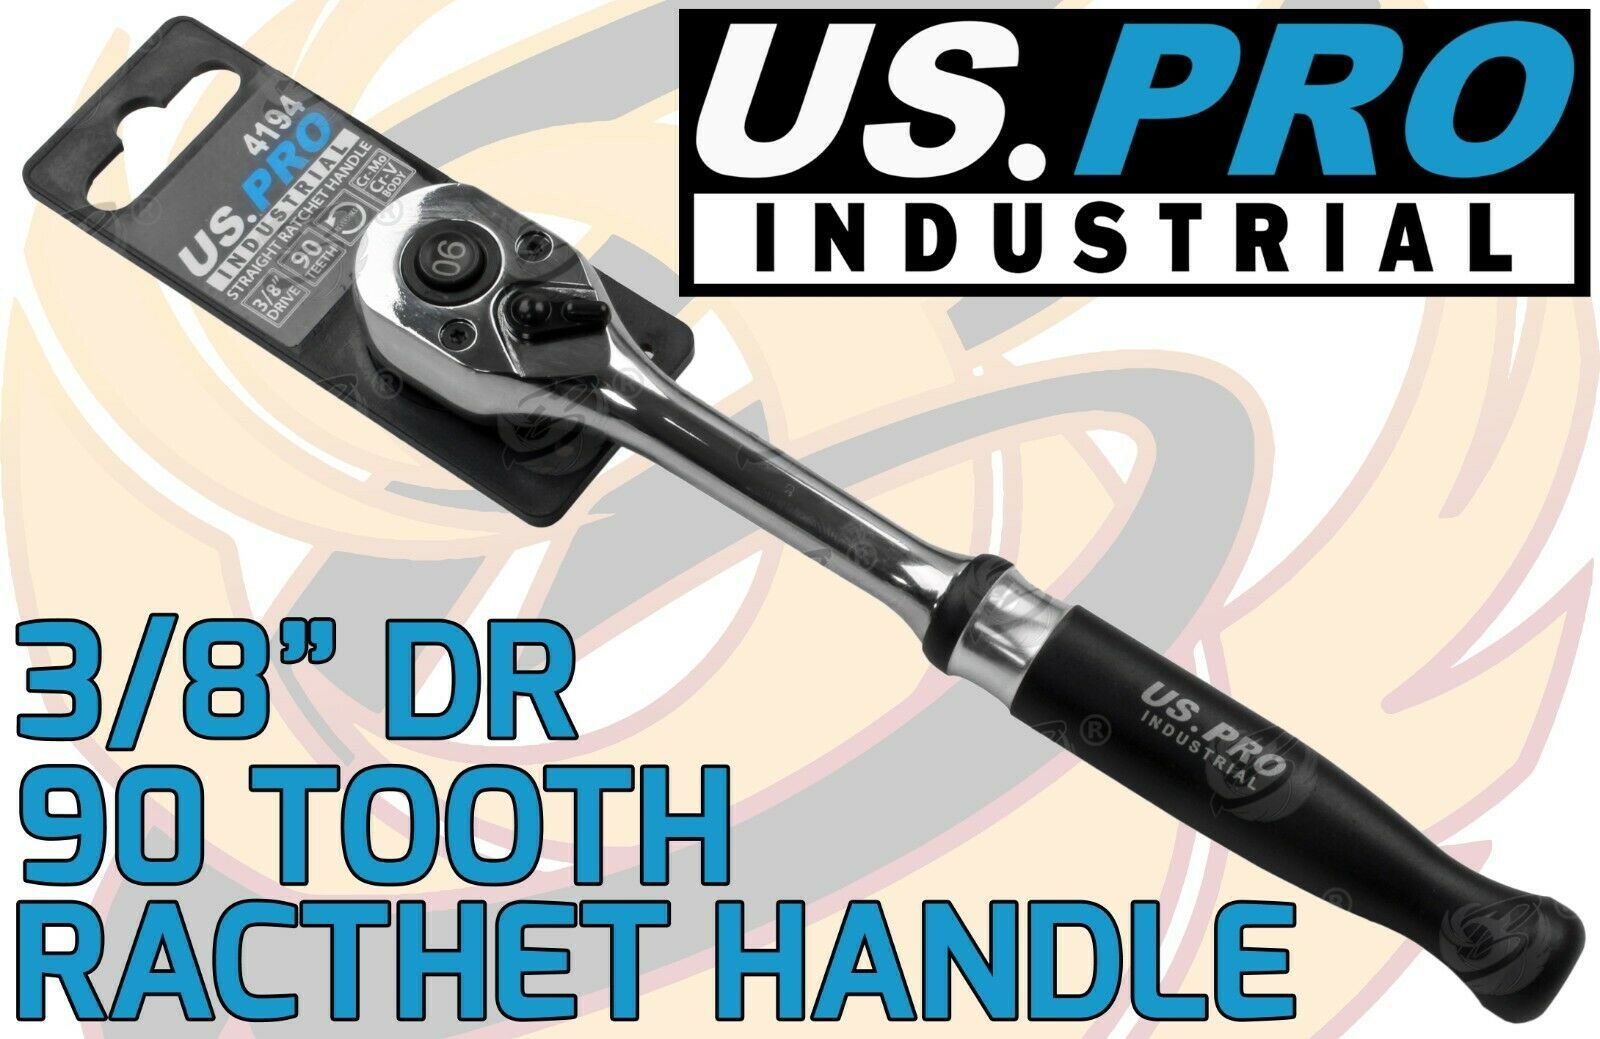 US PRO INDUSTRIAL 3/8" DRIVE 90 TOOTH RATCHET HANDLE